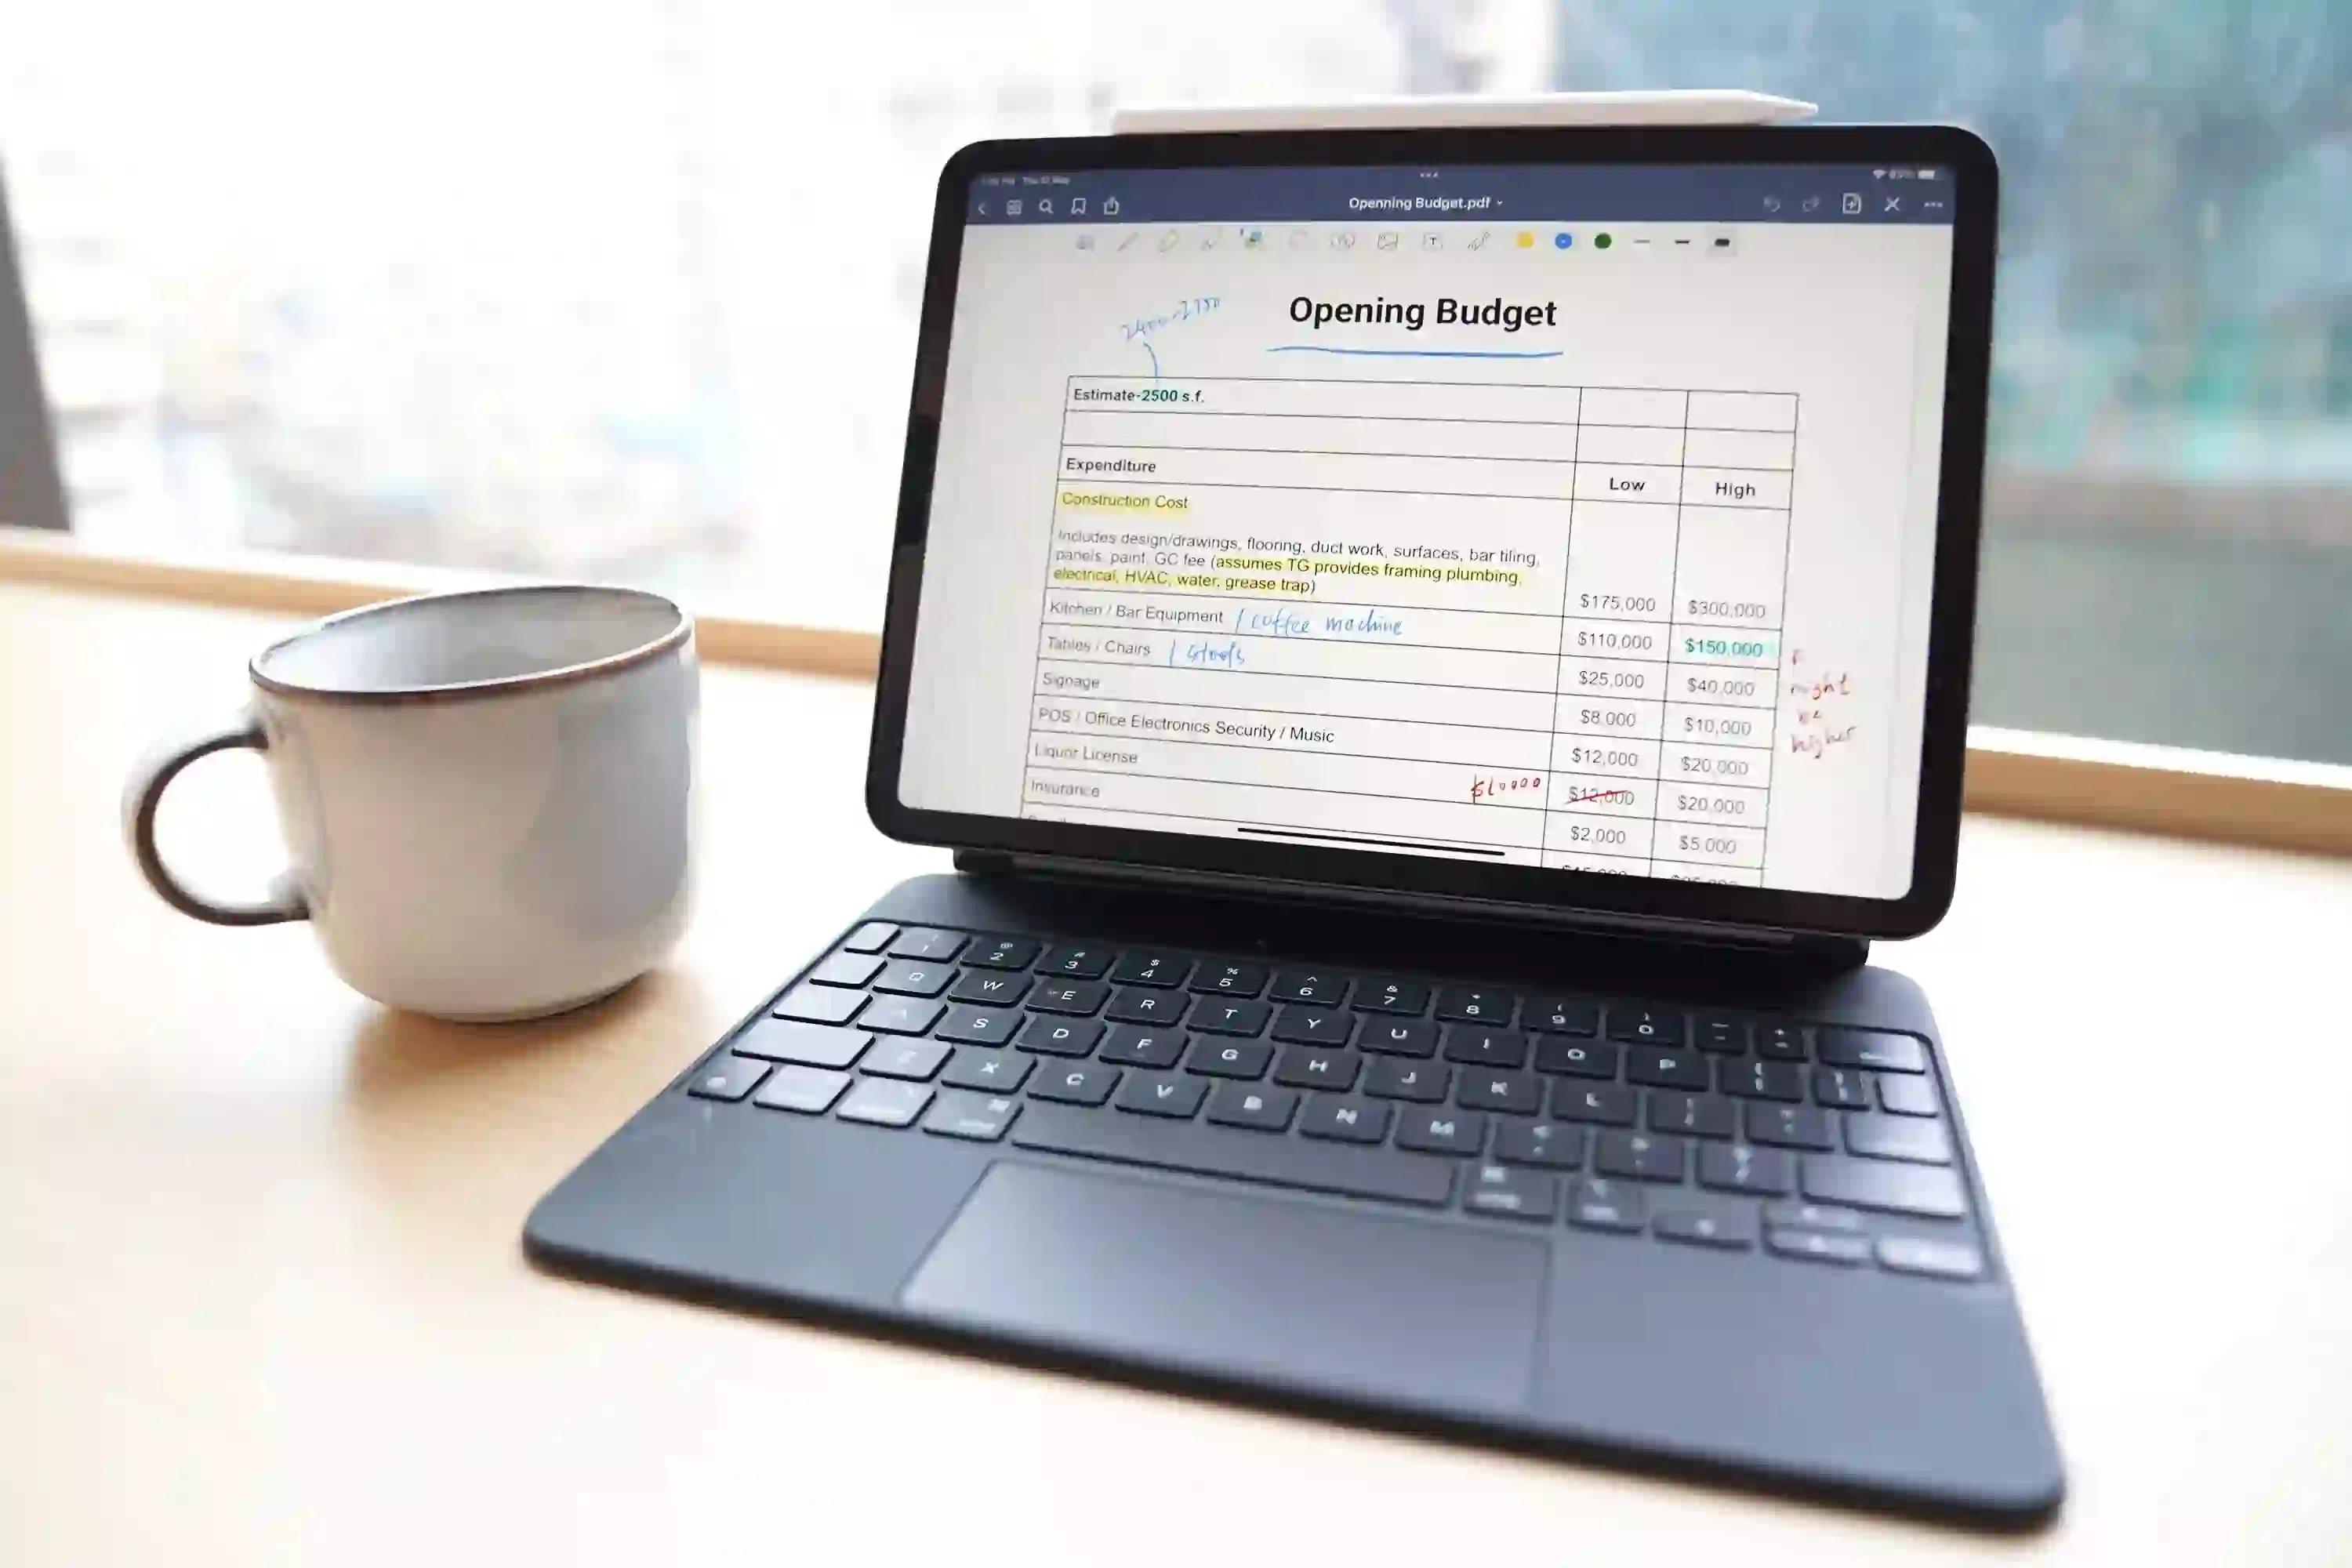 budget sheet displayed on a laptop which is placed on a table with a coffee cup on the left